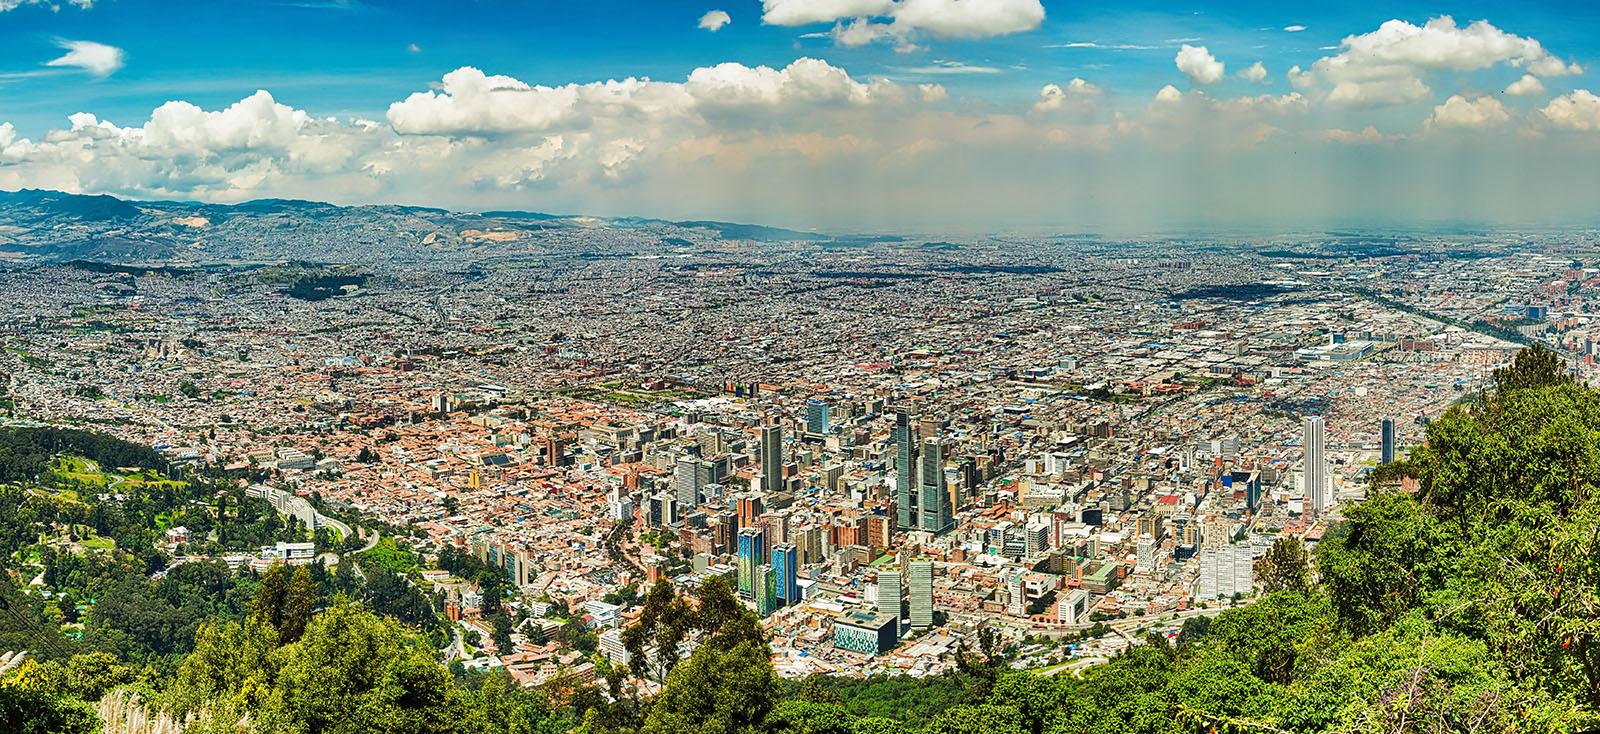 View of the historic center of Bogota, Columbia.